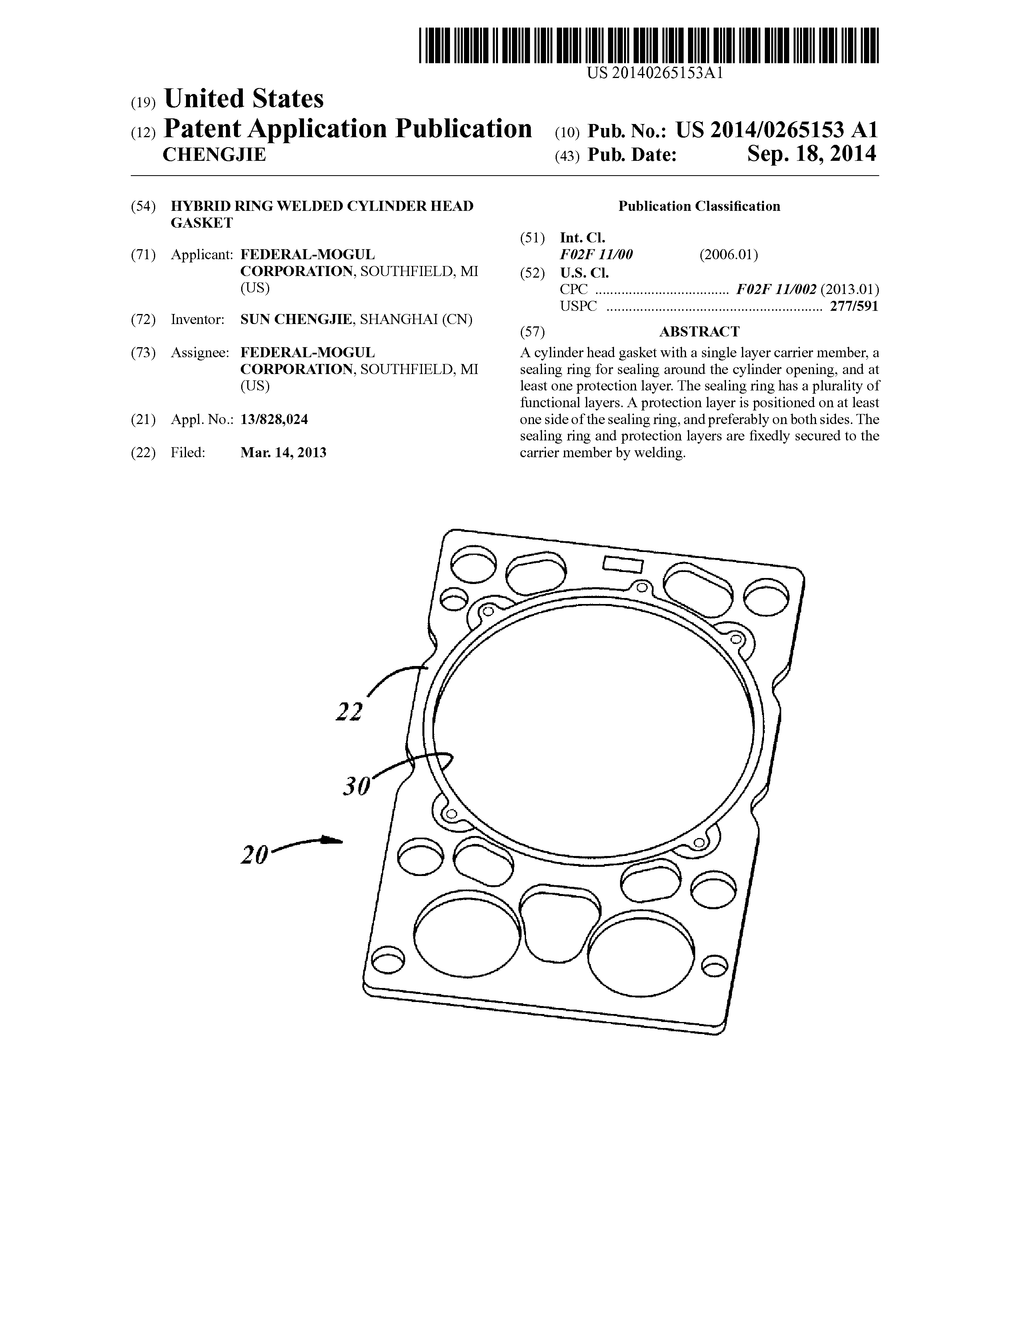 HYBRID RING WELDED CYLINDER HEAD GASKET - diagram, schematic, and image 01